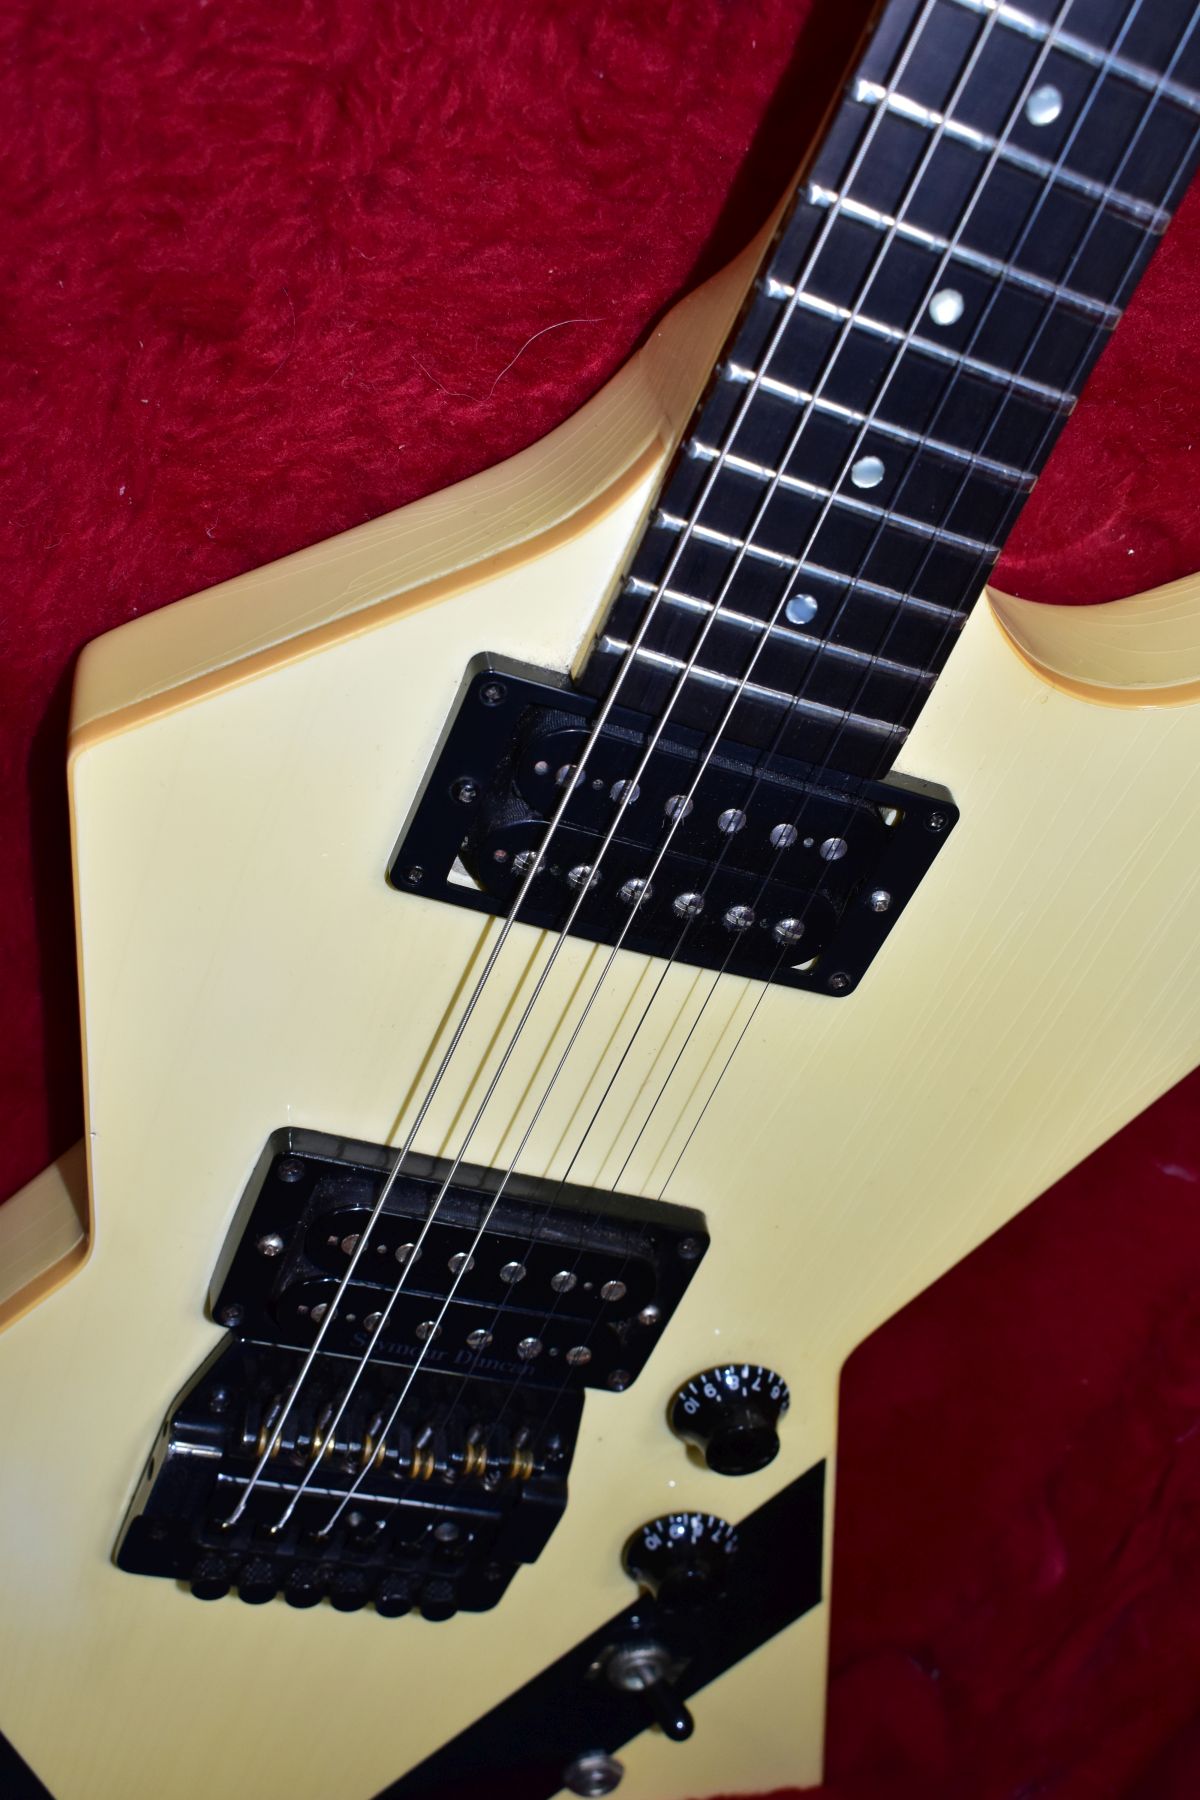 A 1985 GIBSON CUSTOM SHOP XPL EXPLORER GUITAR with a cream finish and black detailing (some - Image 5 of 6